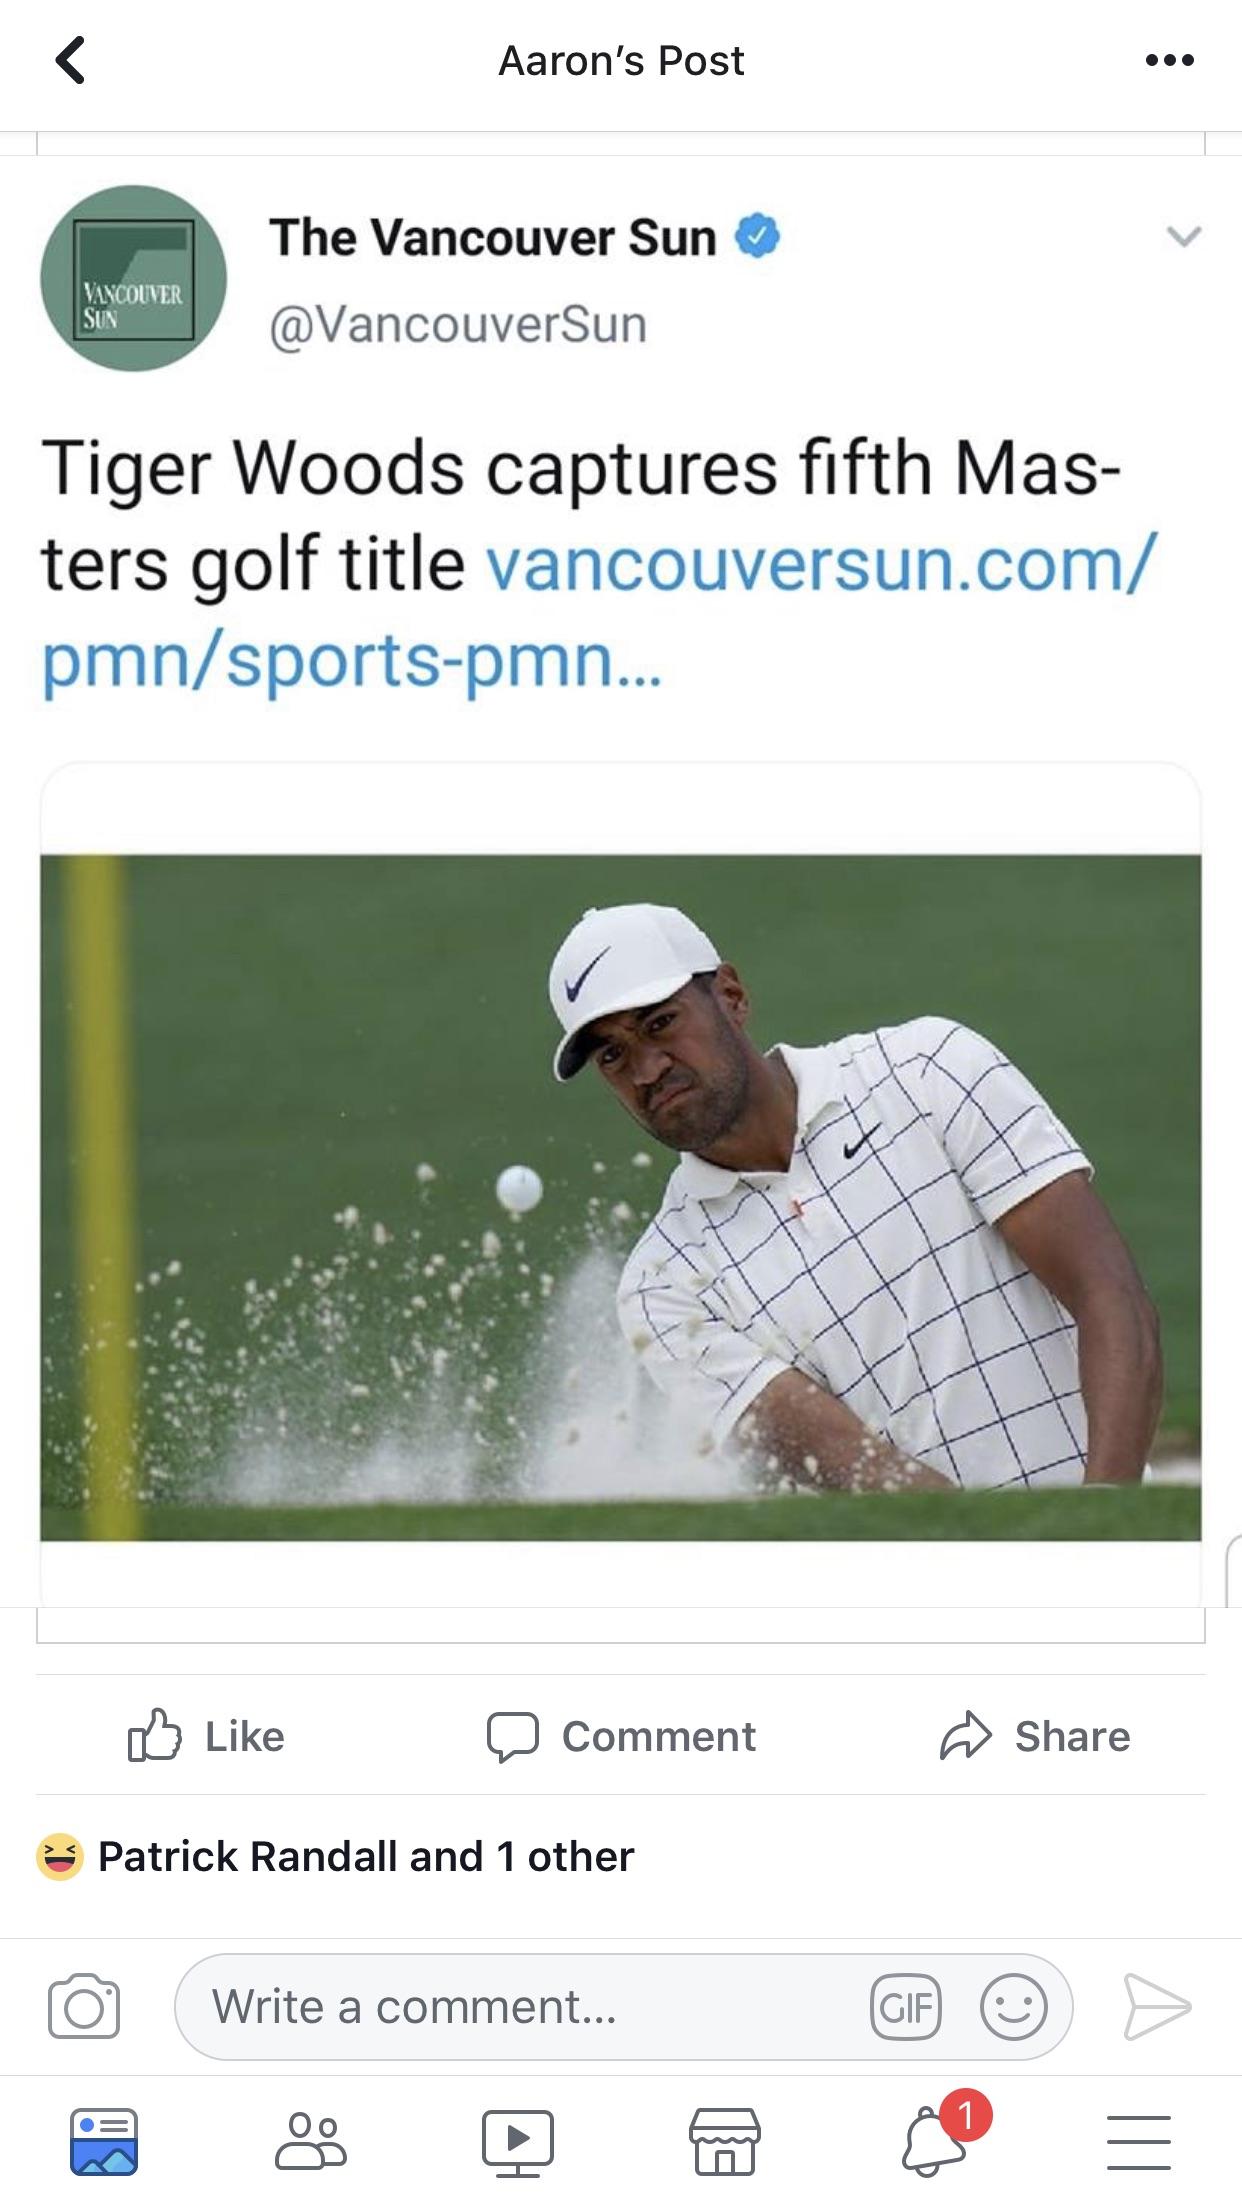 screenshot - Aaron's Post The Vancouver Sun Vancouver Sun Tiger Woods captures fifth Mas ters golf title vancouversun.com pmnsportspmn... 0 Comment Patrick Randall and 1 other o Write a comment...